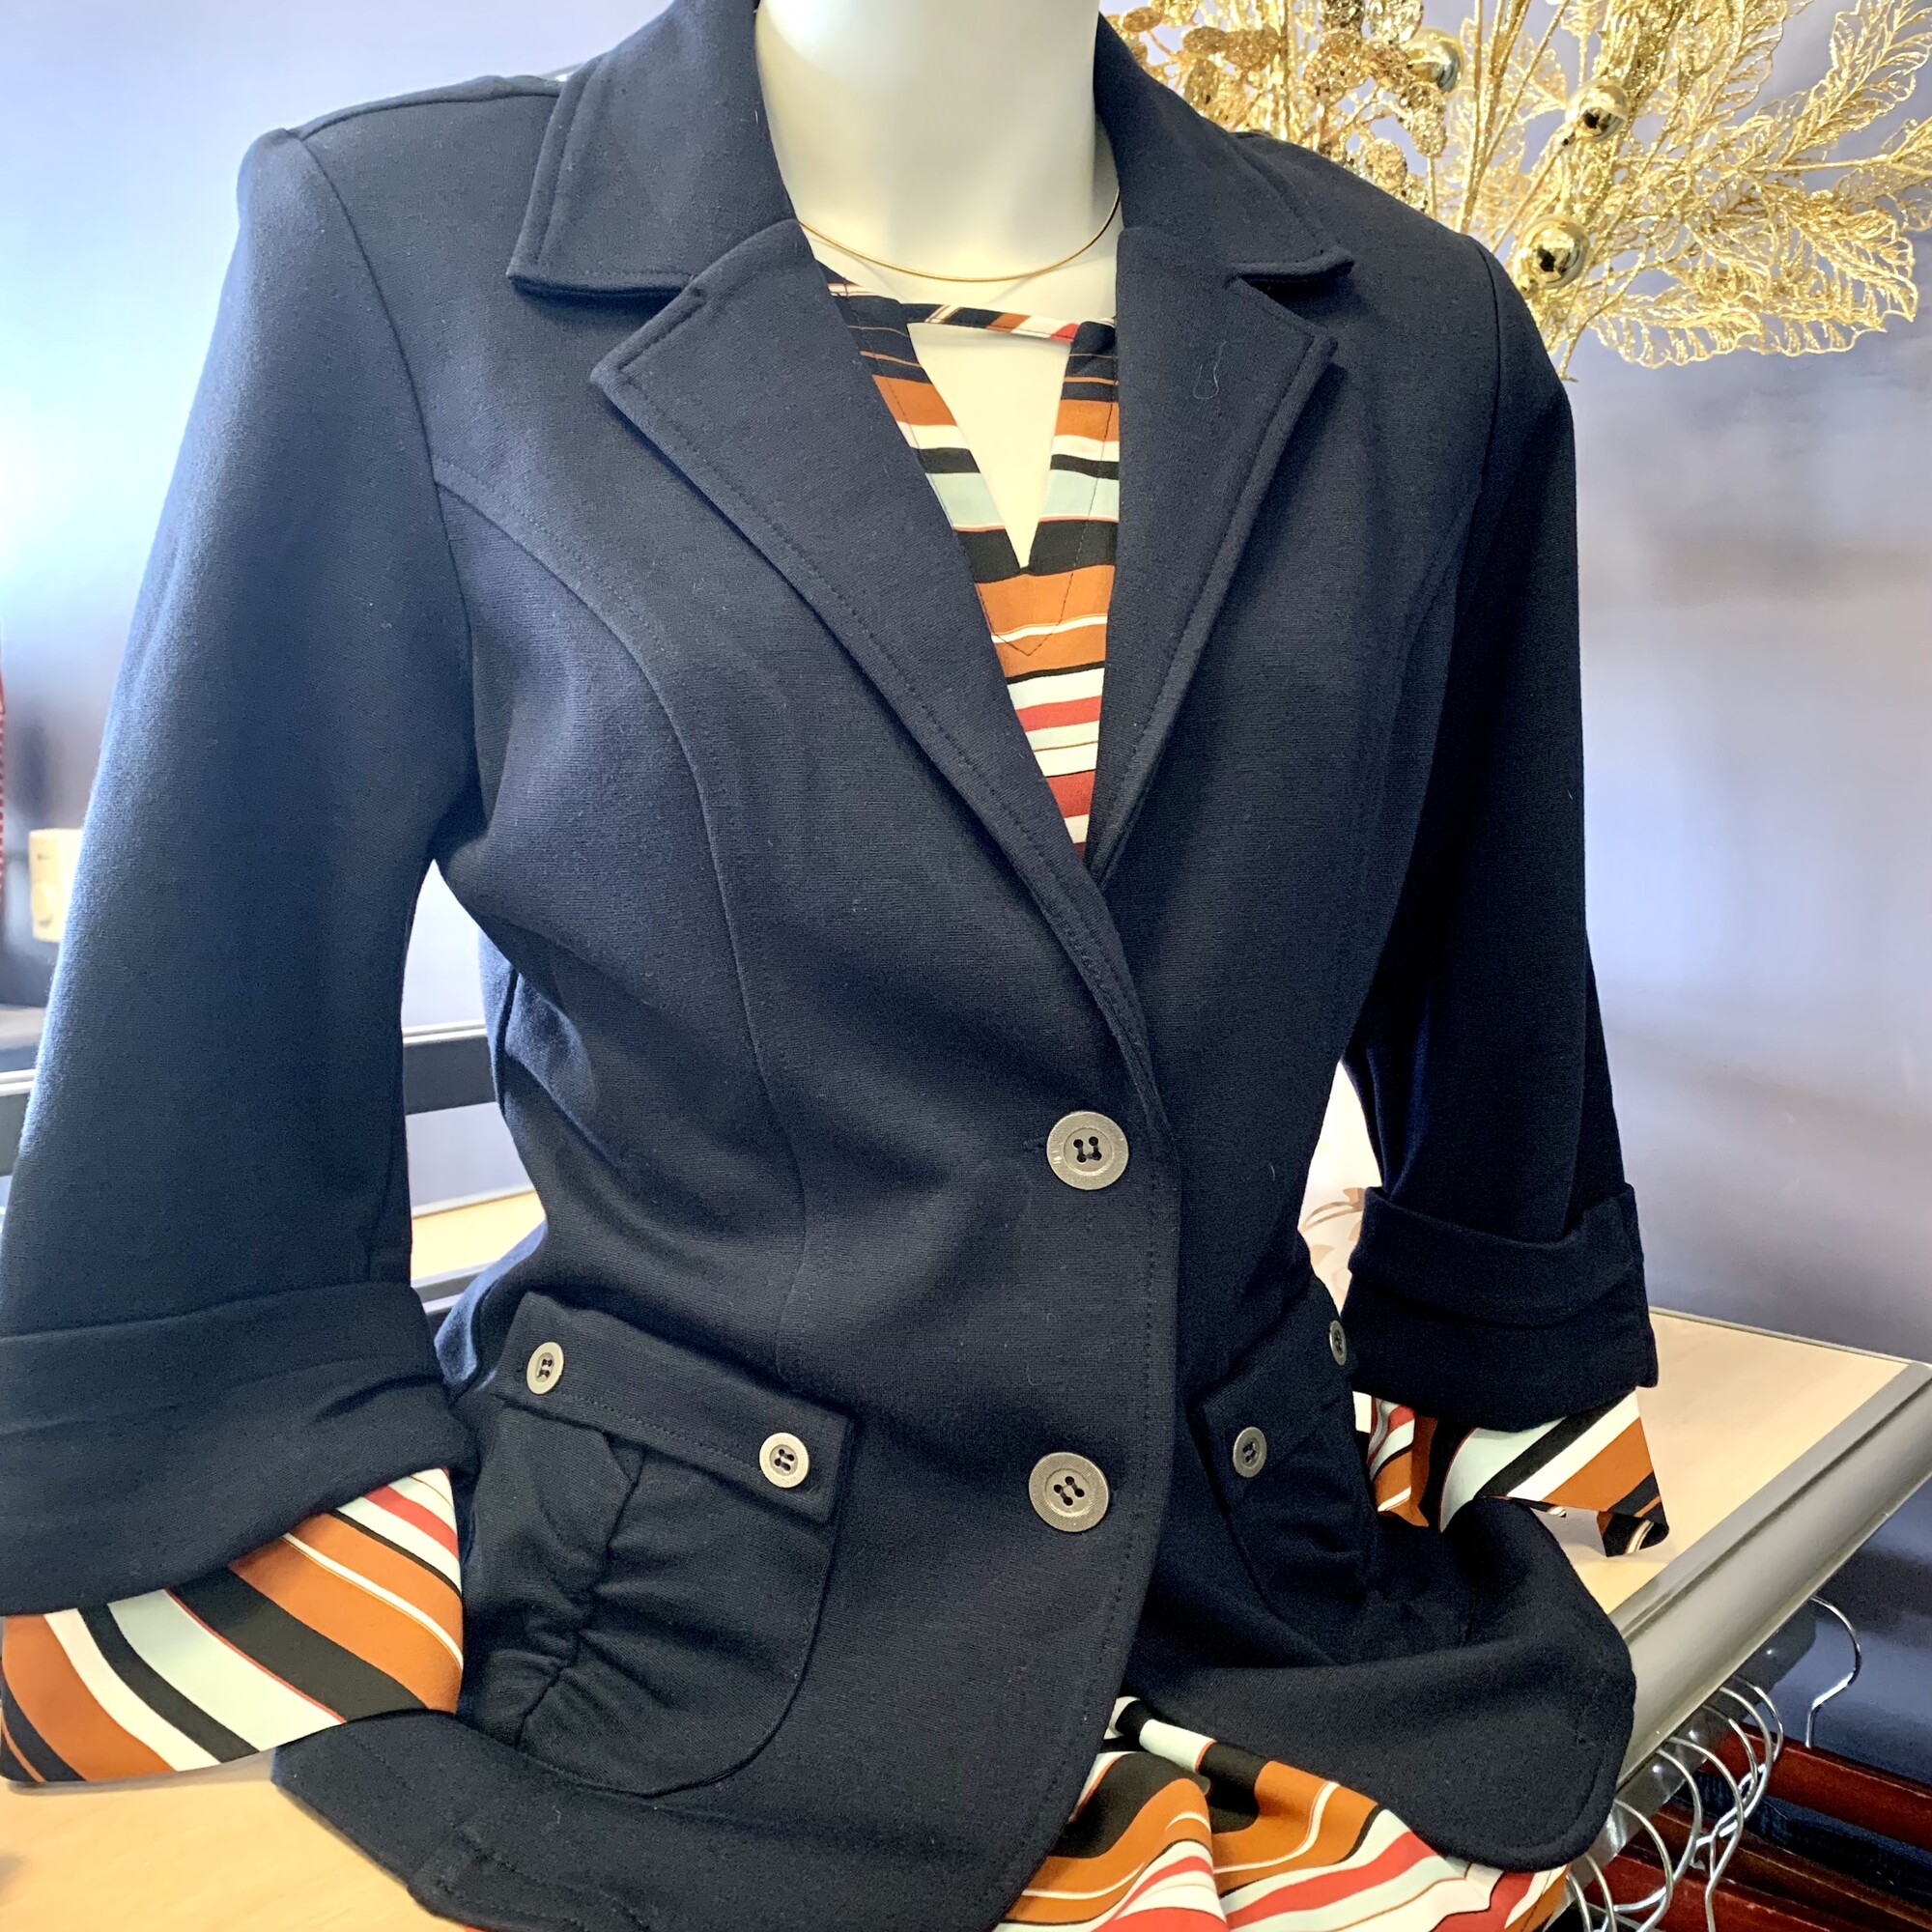 Studio Mode Blazer Jersey,
Colour: Navy,
Size: Medium,
2/3 Sleeve,
Jersey Material,
Part of our winter sale